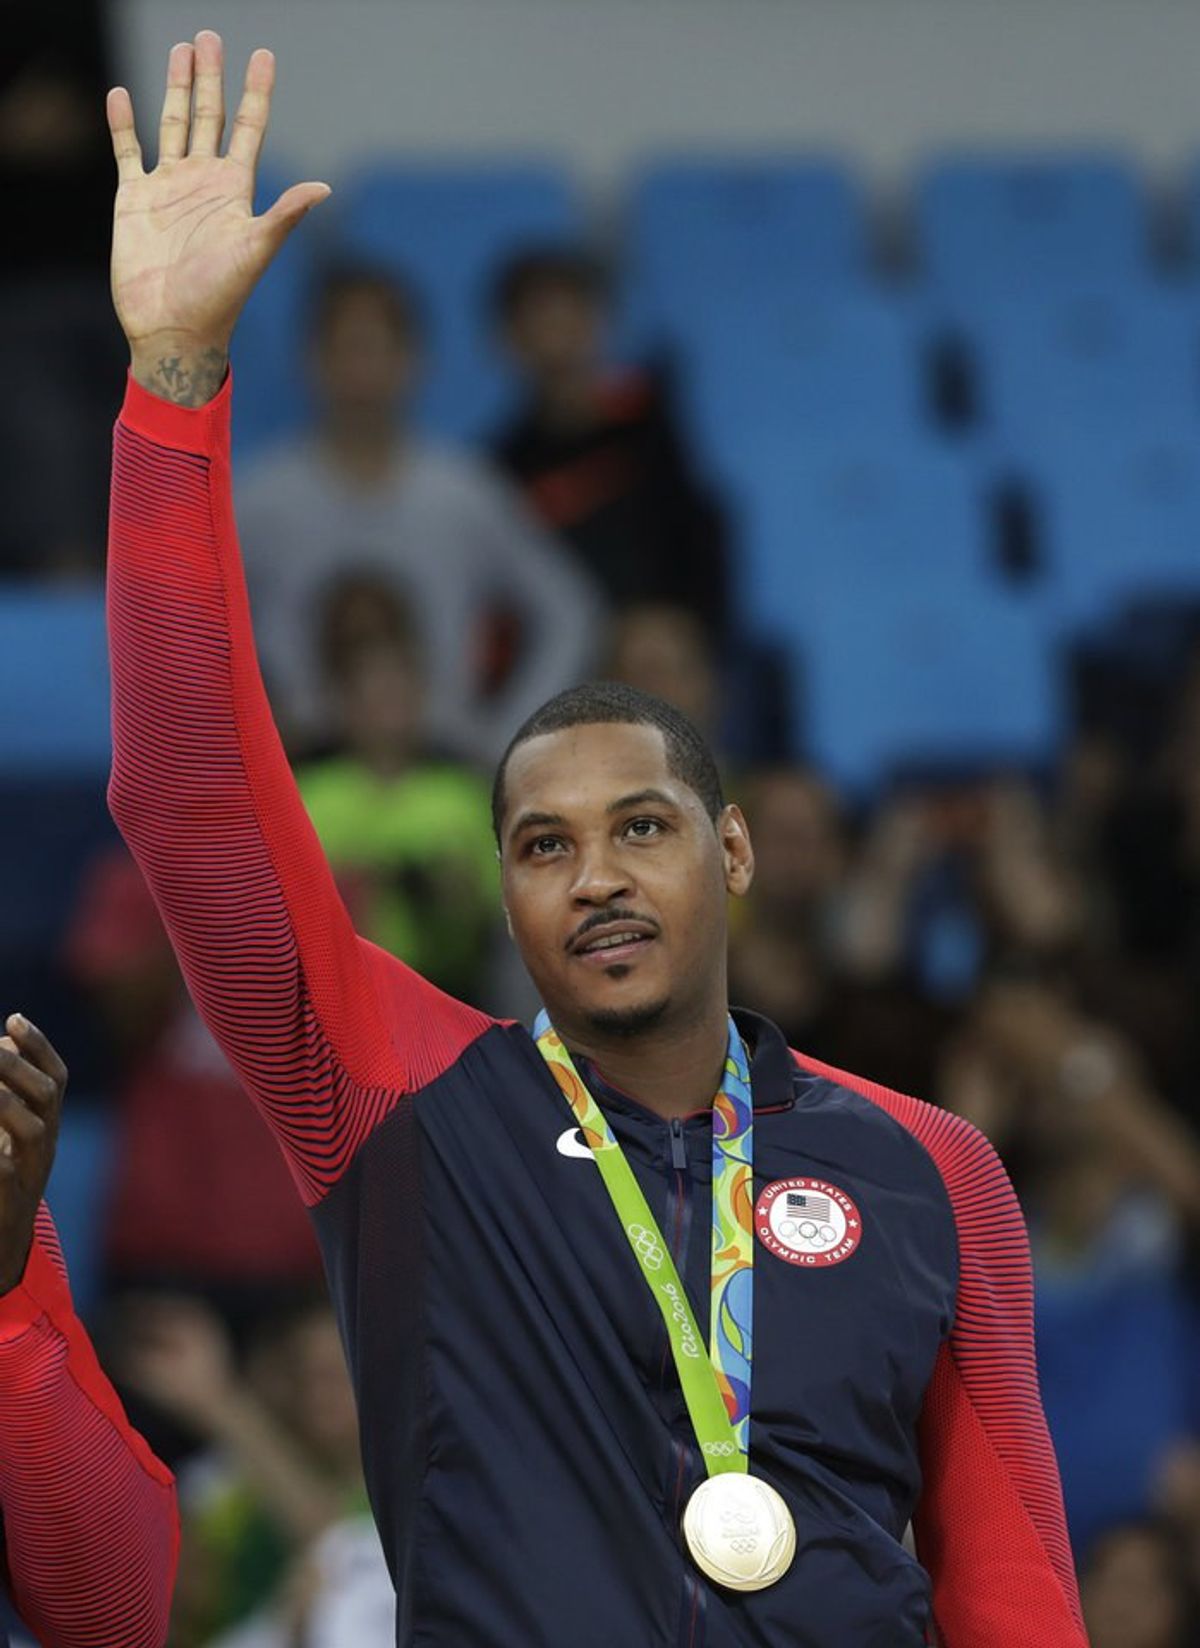 Carmelo Anthony: The Evolution Of A Leader